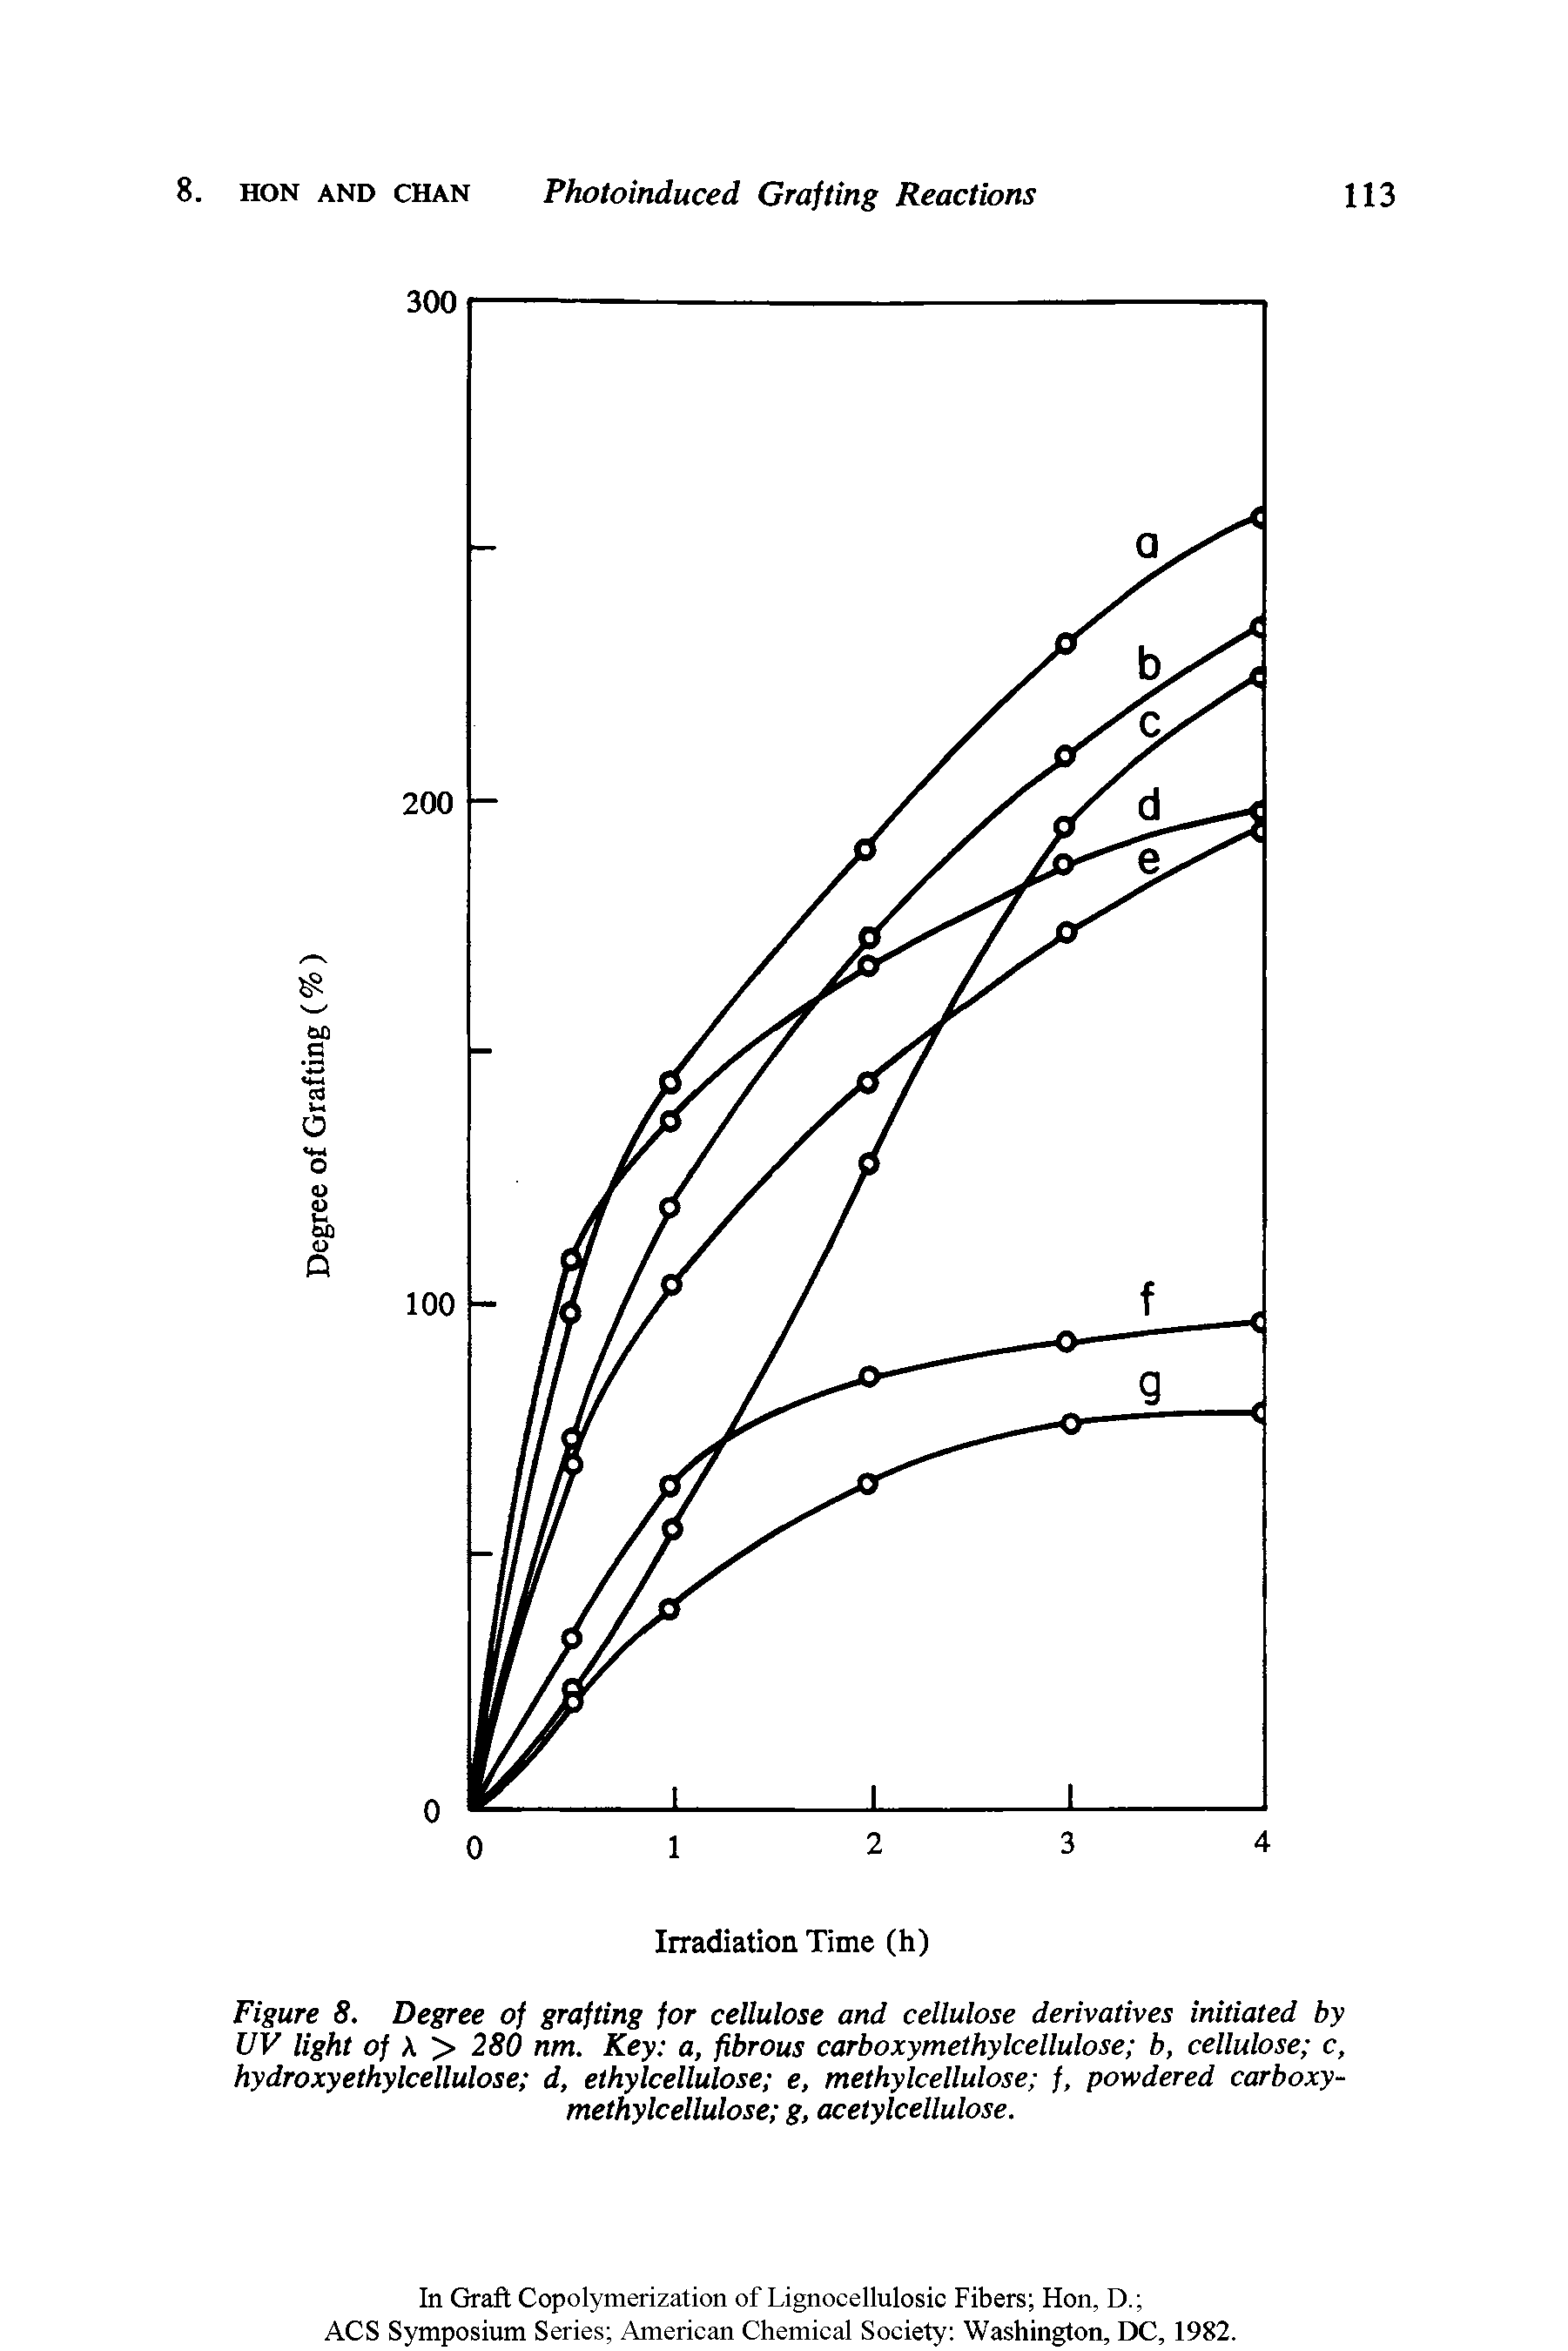 Figure 8. Degree of grafting for cellulose and cellulose derivatives initiated by UV light of > 280 nm. Key a, fibrous carboxymethylcellulose b, cellulose c, hydroxyethylcellulose d, ethylcellulose e, methylcellulose f, powdered carboxymethylcellulose g, acetylcellulose.